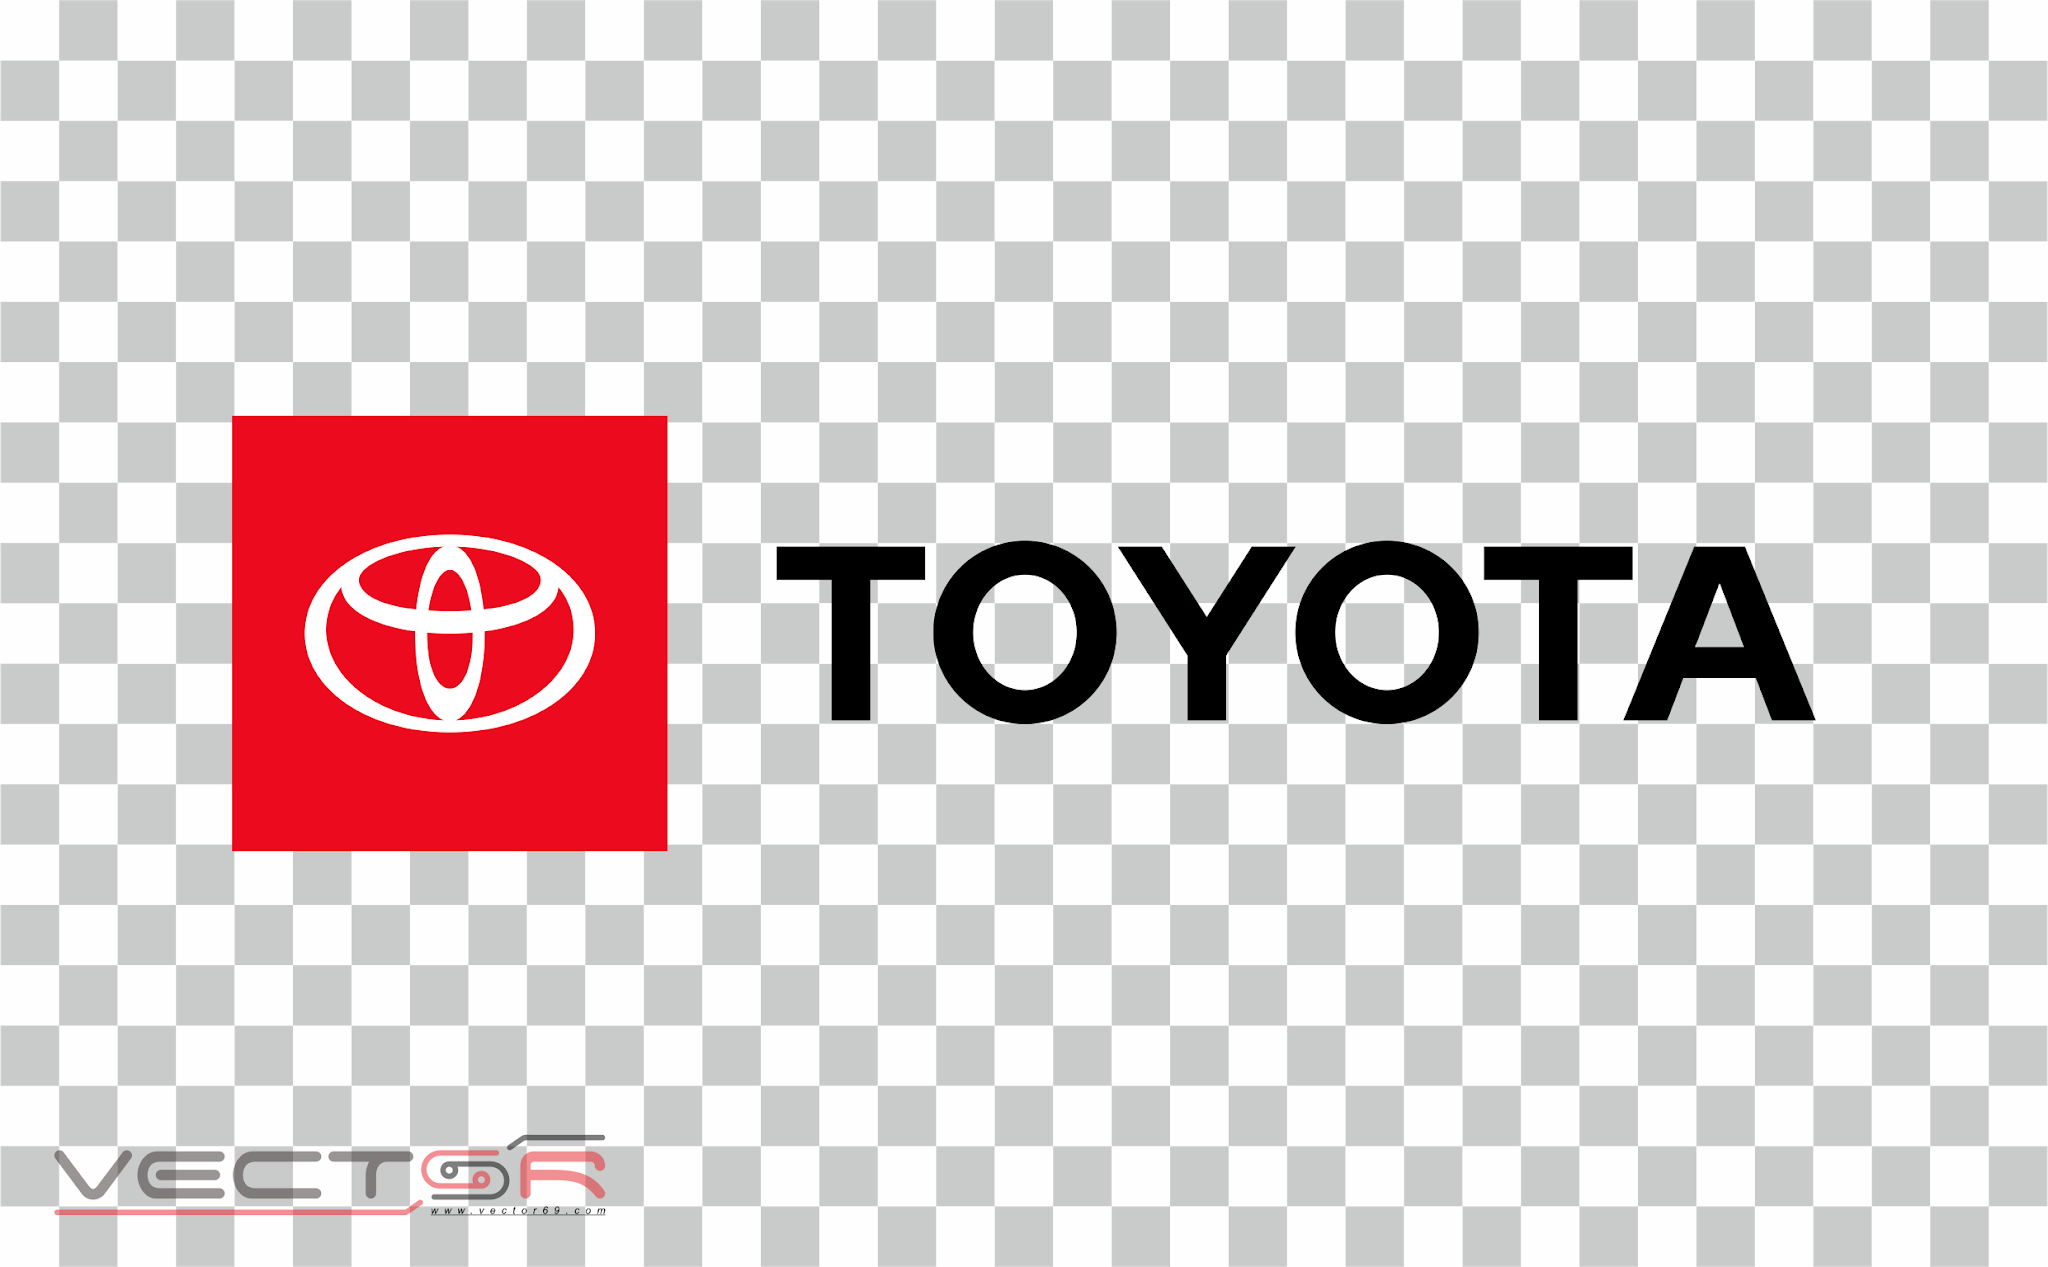 Toyota Logo - Download Vector File PNG (Portable Network Graphics)